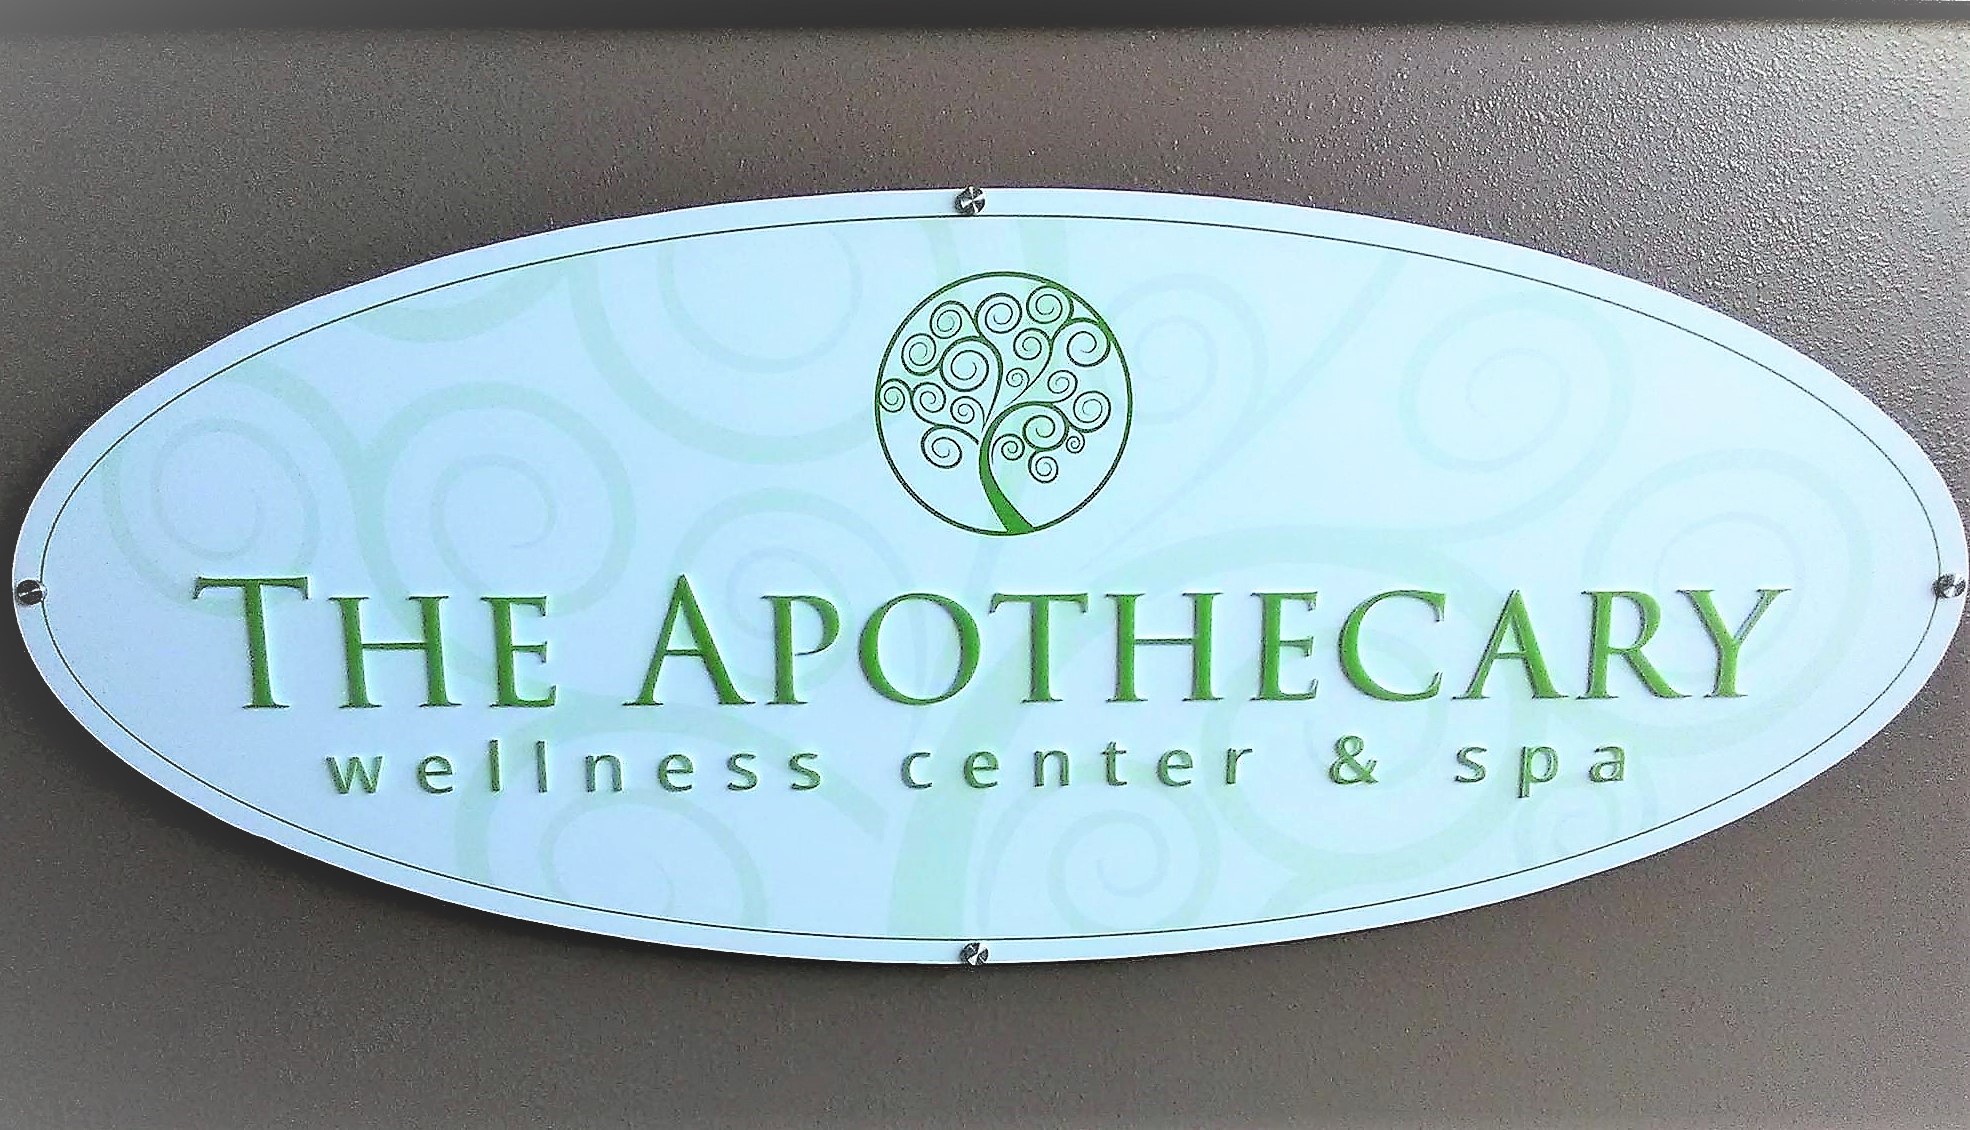 The Apothecary Wellness Center & Spa